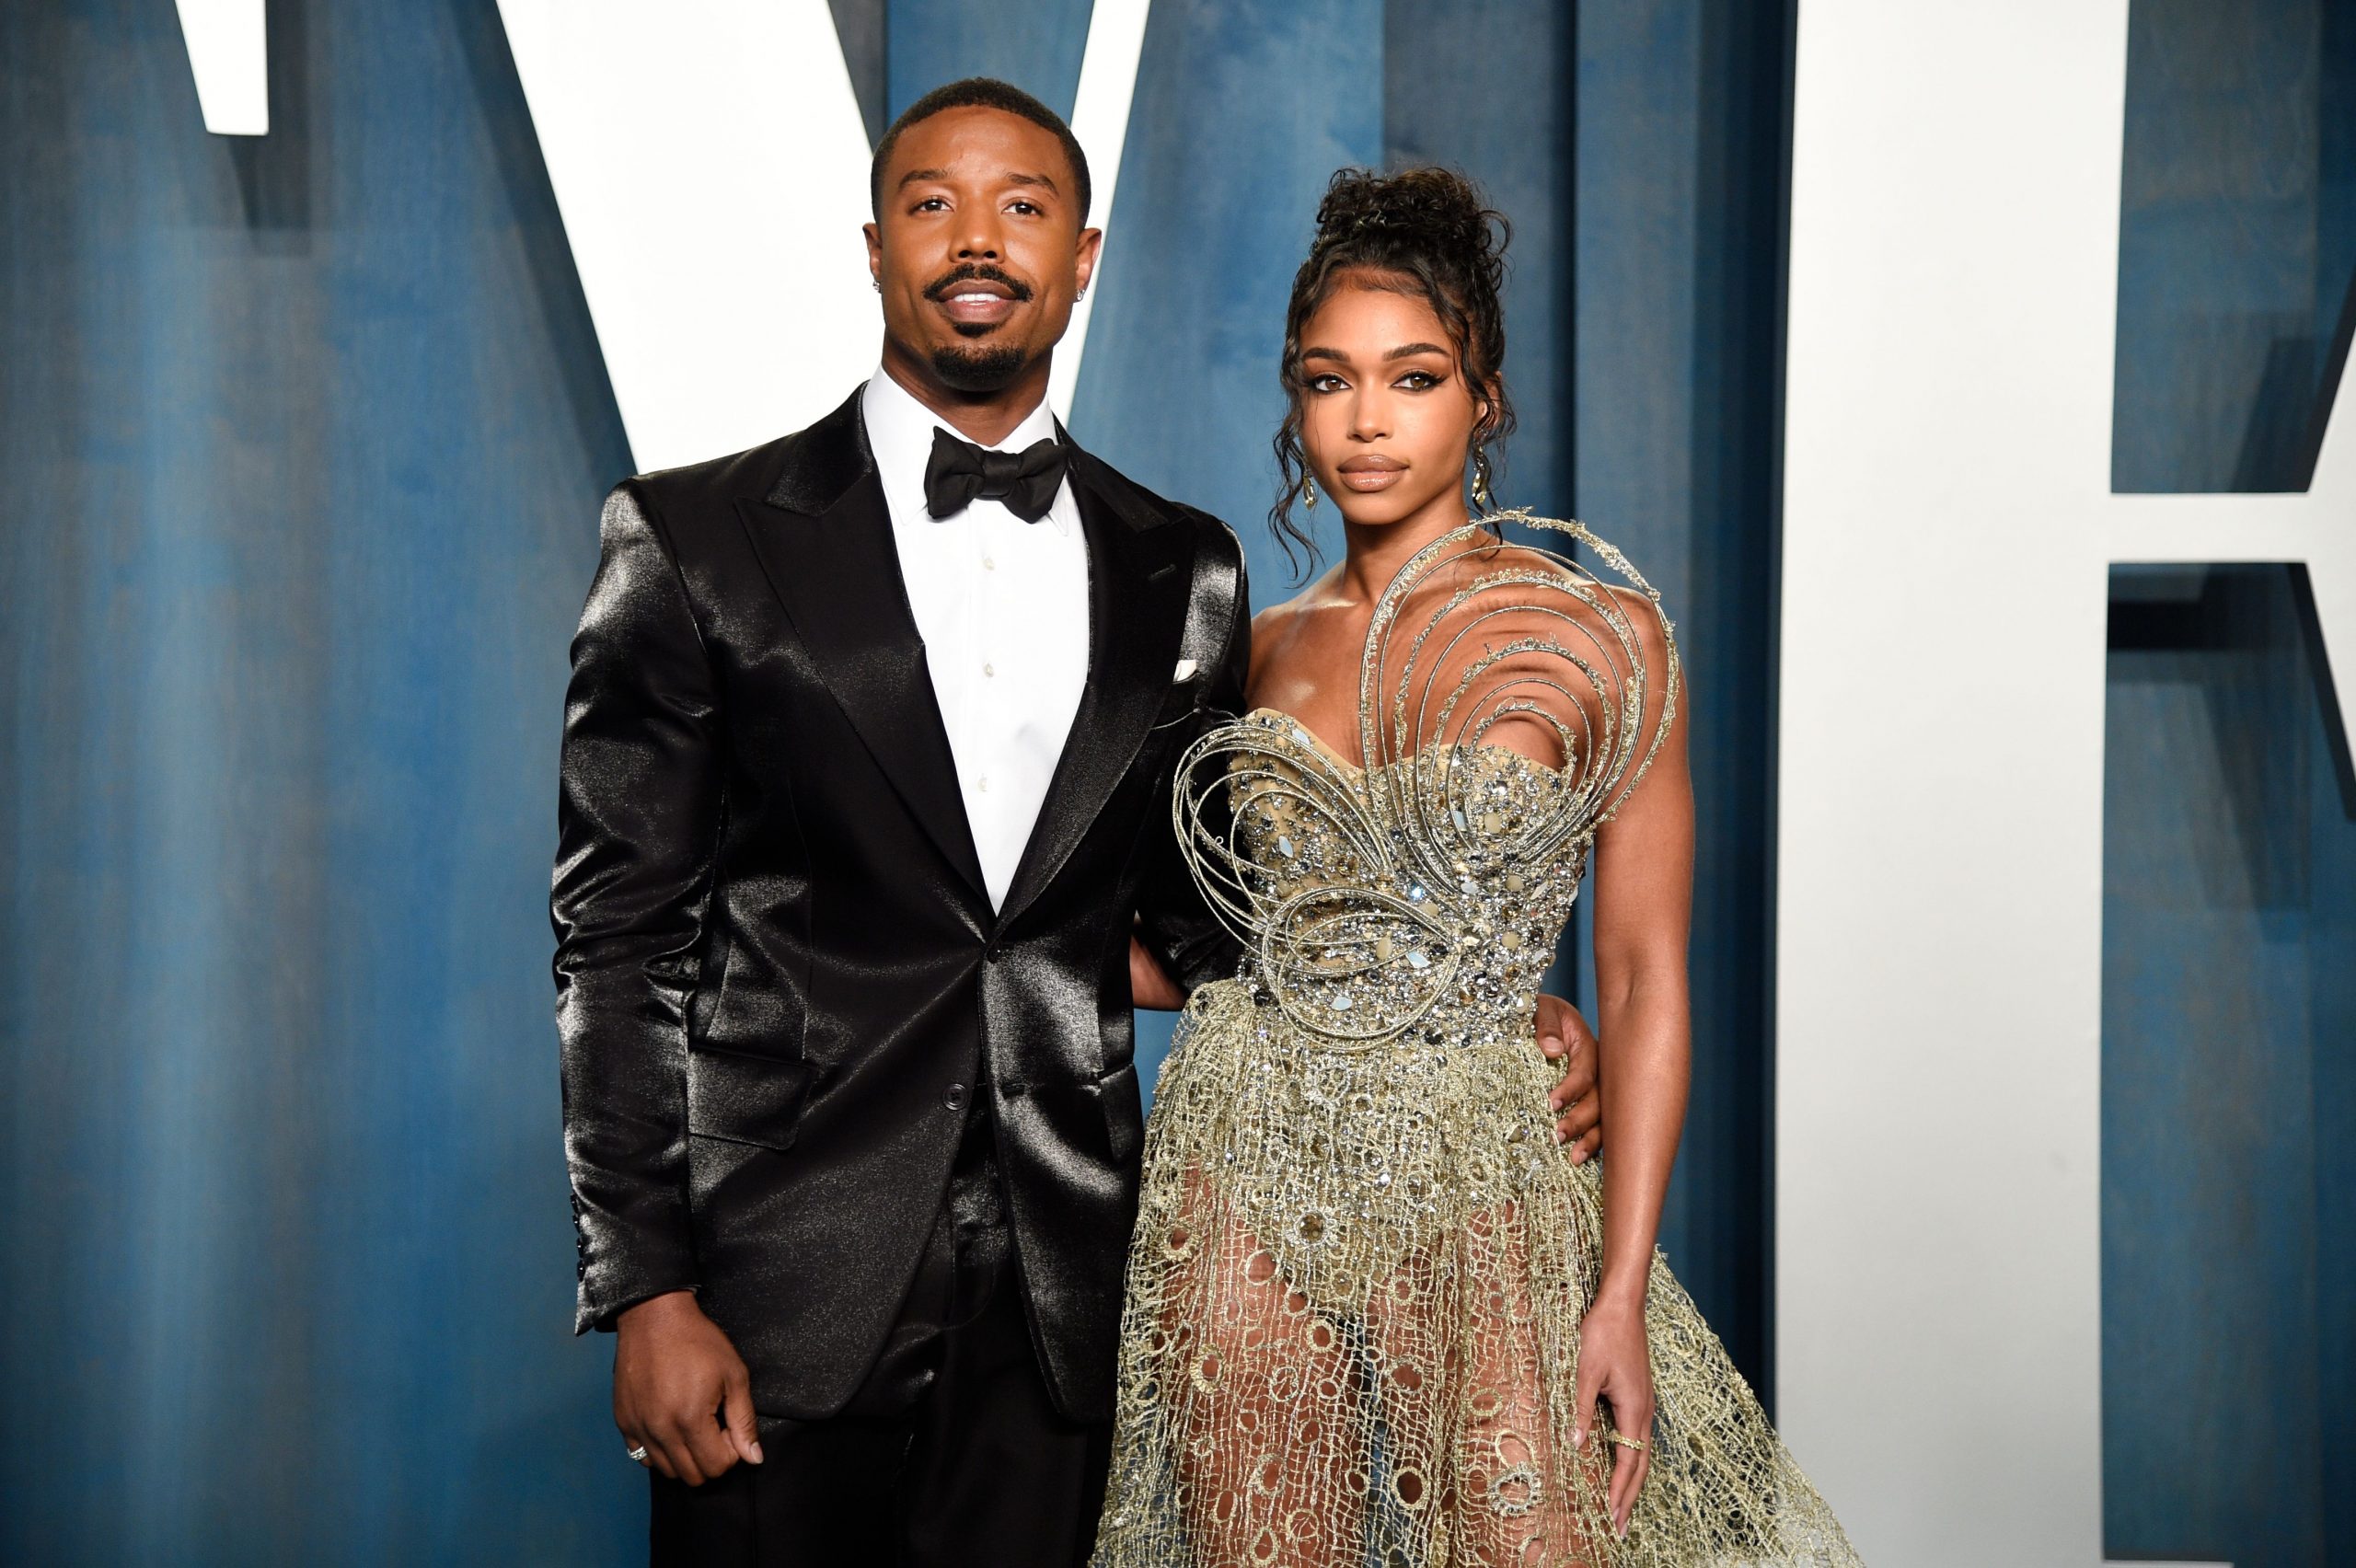 Michael B Jordan standing with Lori Harvey . Michael B Jordan is wearing a Tuxedo and Lori Harvey is wearing a gold gown.